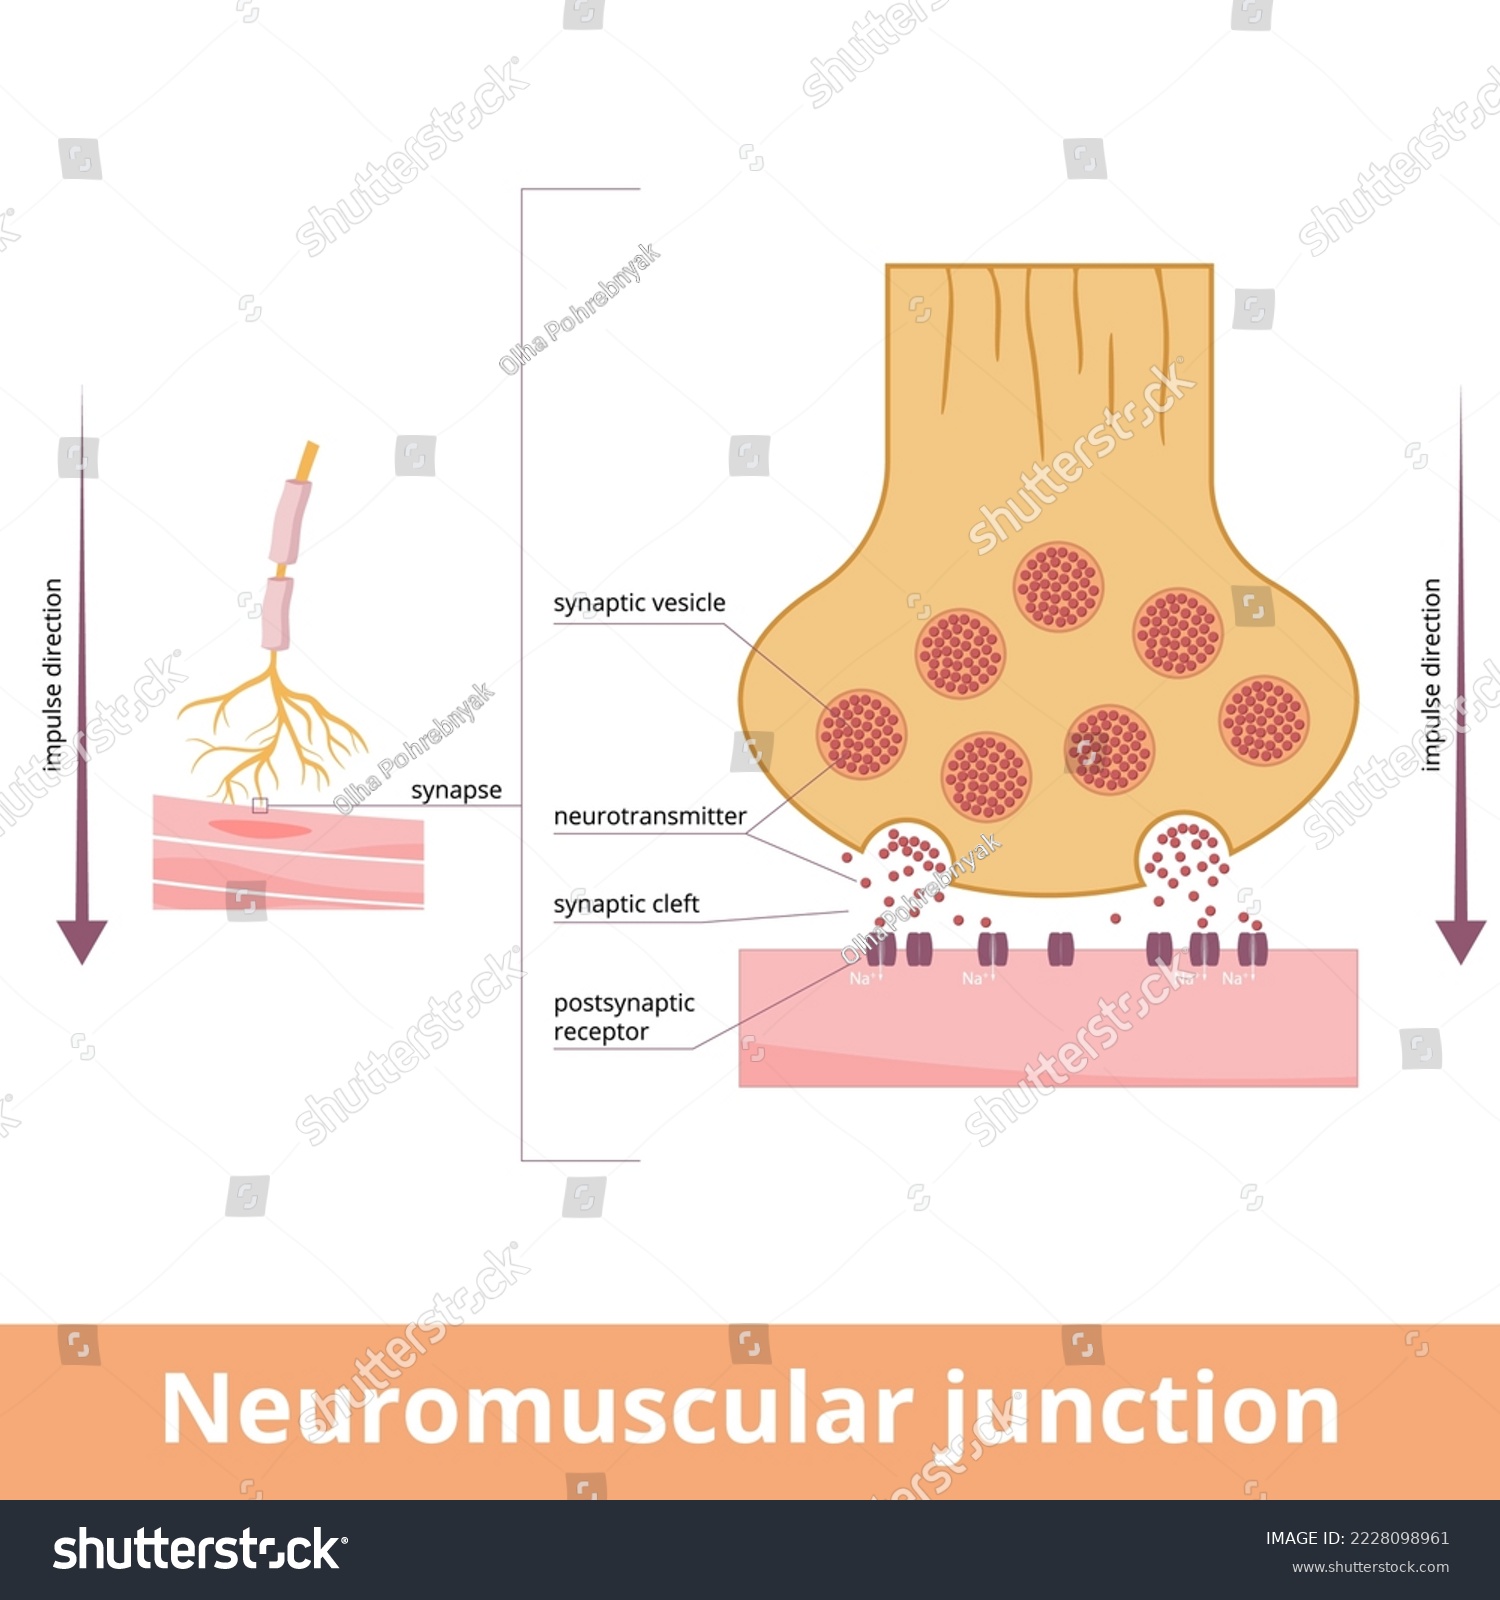 SVG of Neuromuscular junction. A synaptic connection between the terminal end of a motor nerve and a muscle. Presynaptic (nerve terminal), postsynaptic part, synaptic cleft. svg